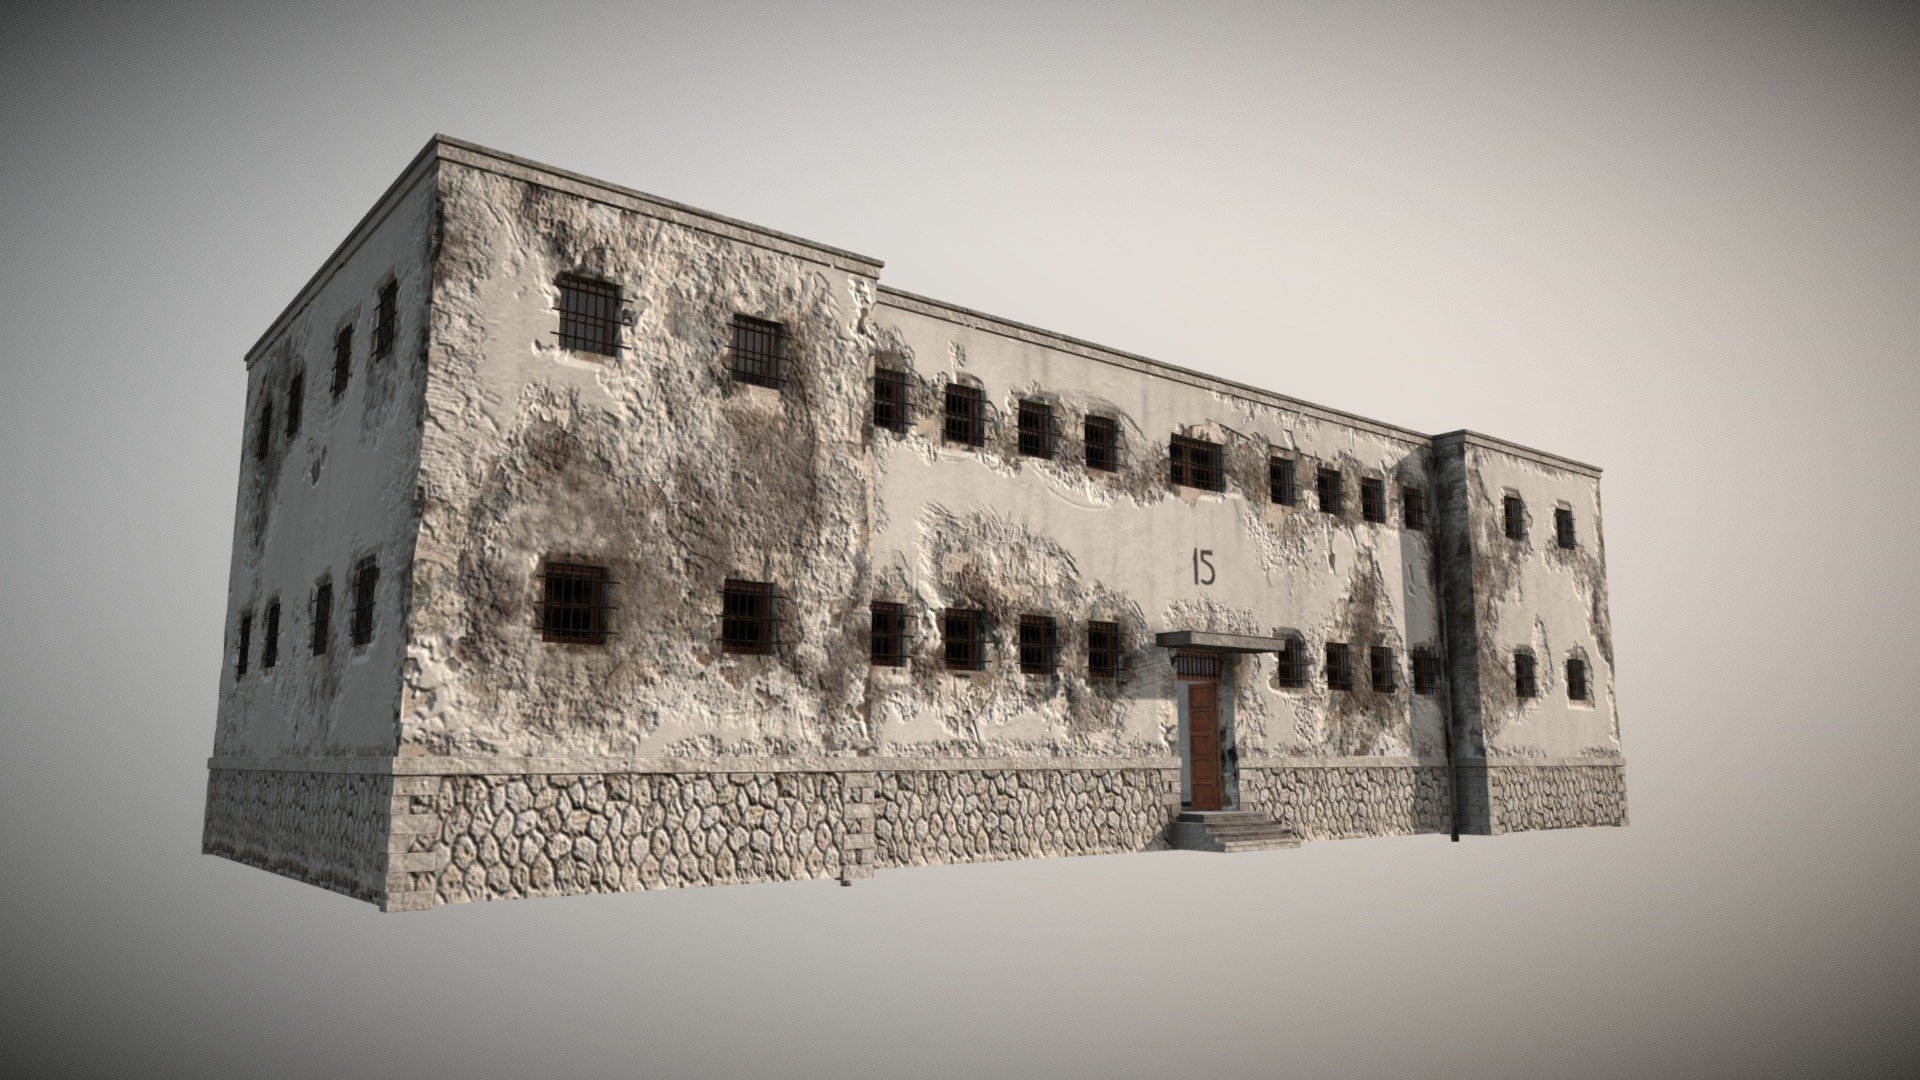 This is a 3D model of the infamous Block 15 of the Haidari Concentration Camp in Western Athens, the largest and most notorious German concentration camp in wartime Greece (1941-44). The building included isolation cells and hosted prisoners, most of which were tortured and executed by the Nazis. Block 15 was intentionally left in a derelict state to further impose a sense of fear and desperation.

The model has been created as part of the virtual reality production “Tales from Block 15 – A virtual journey to a grim past”, financed by the German Federal Foreign Office through funds of the German-Greek Future Fund. Project web site: https://block15.aueb.gr/ 3d model